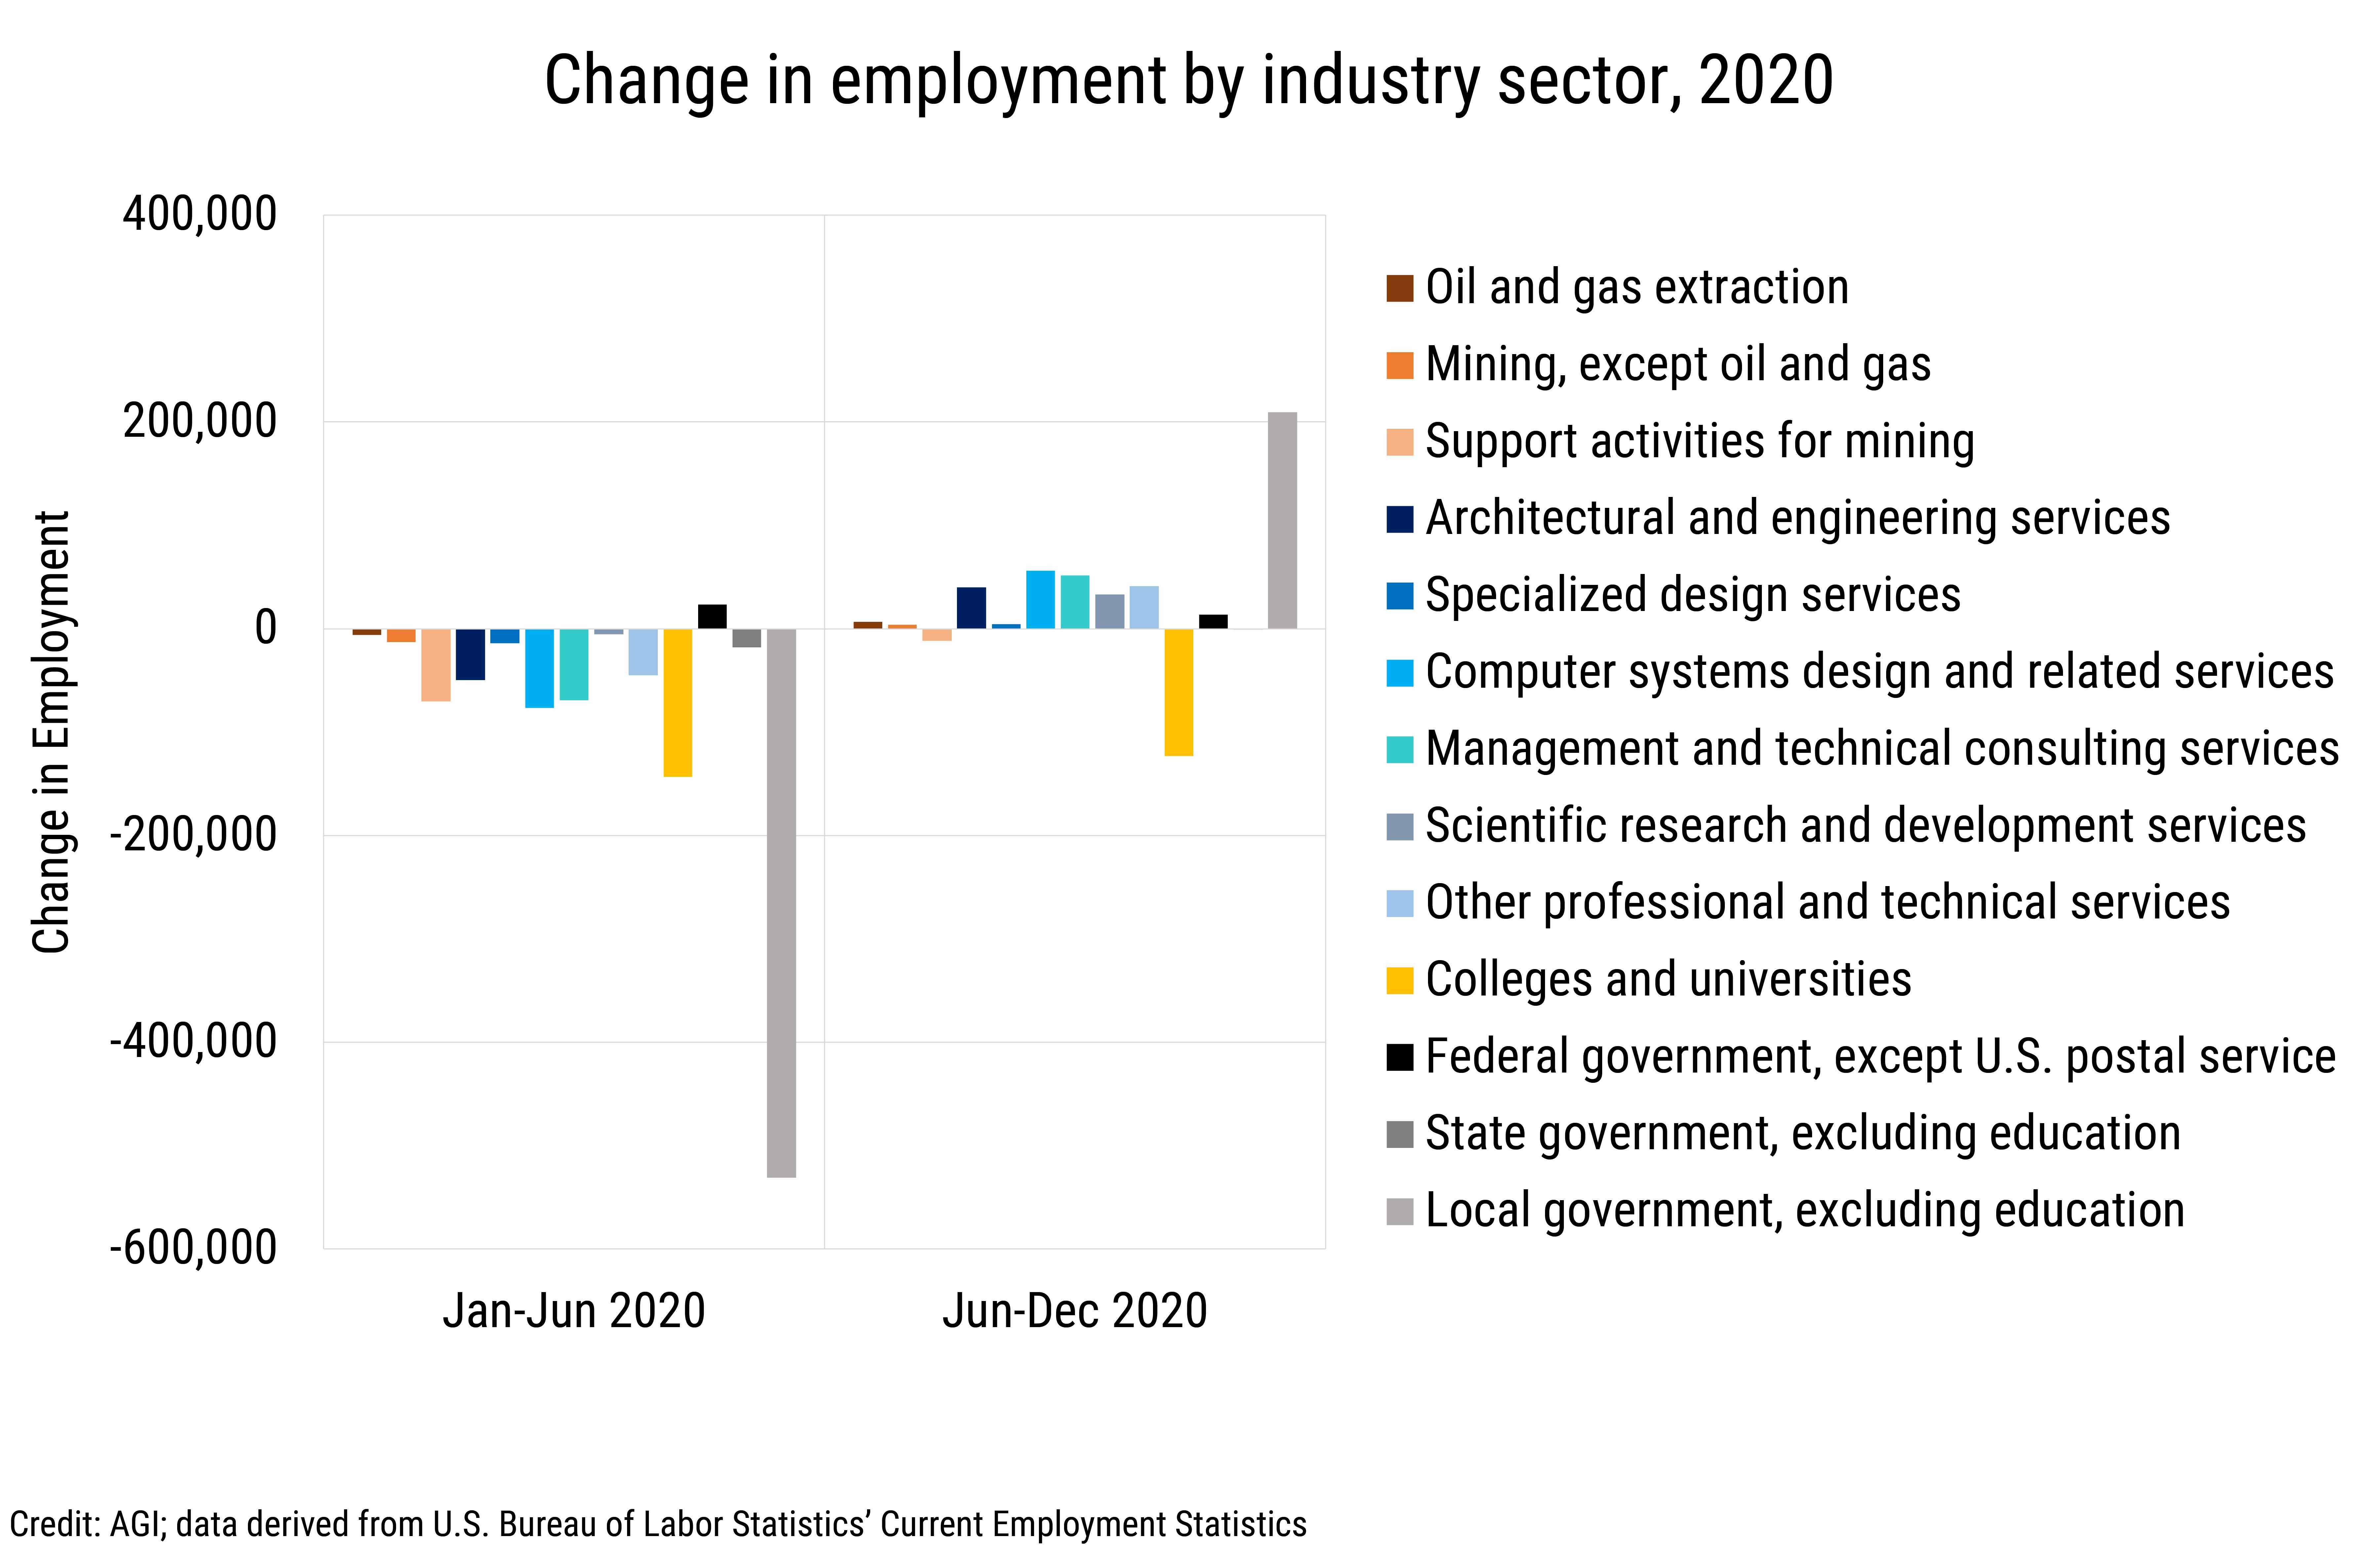 DB_2021-010 chart 05: Change in employment by industry sector, 2020 (Credit: AGI, data derived from the U.S. Bureau of Labor Statistics, Current Employment Statistics)